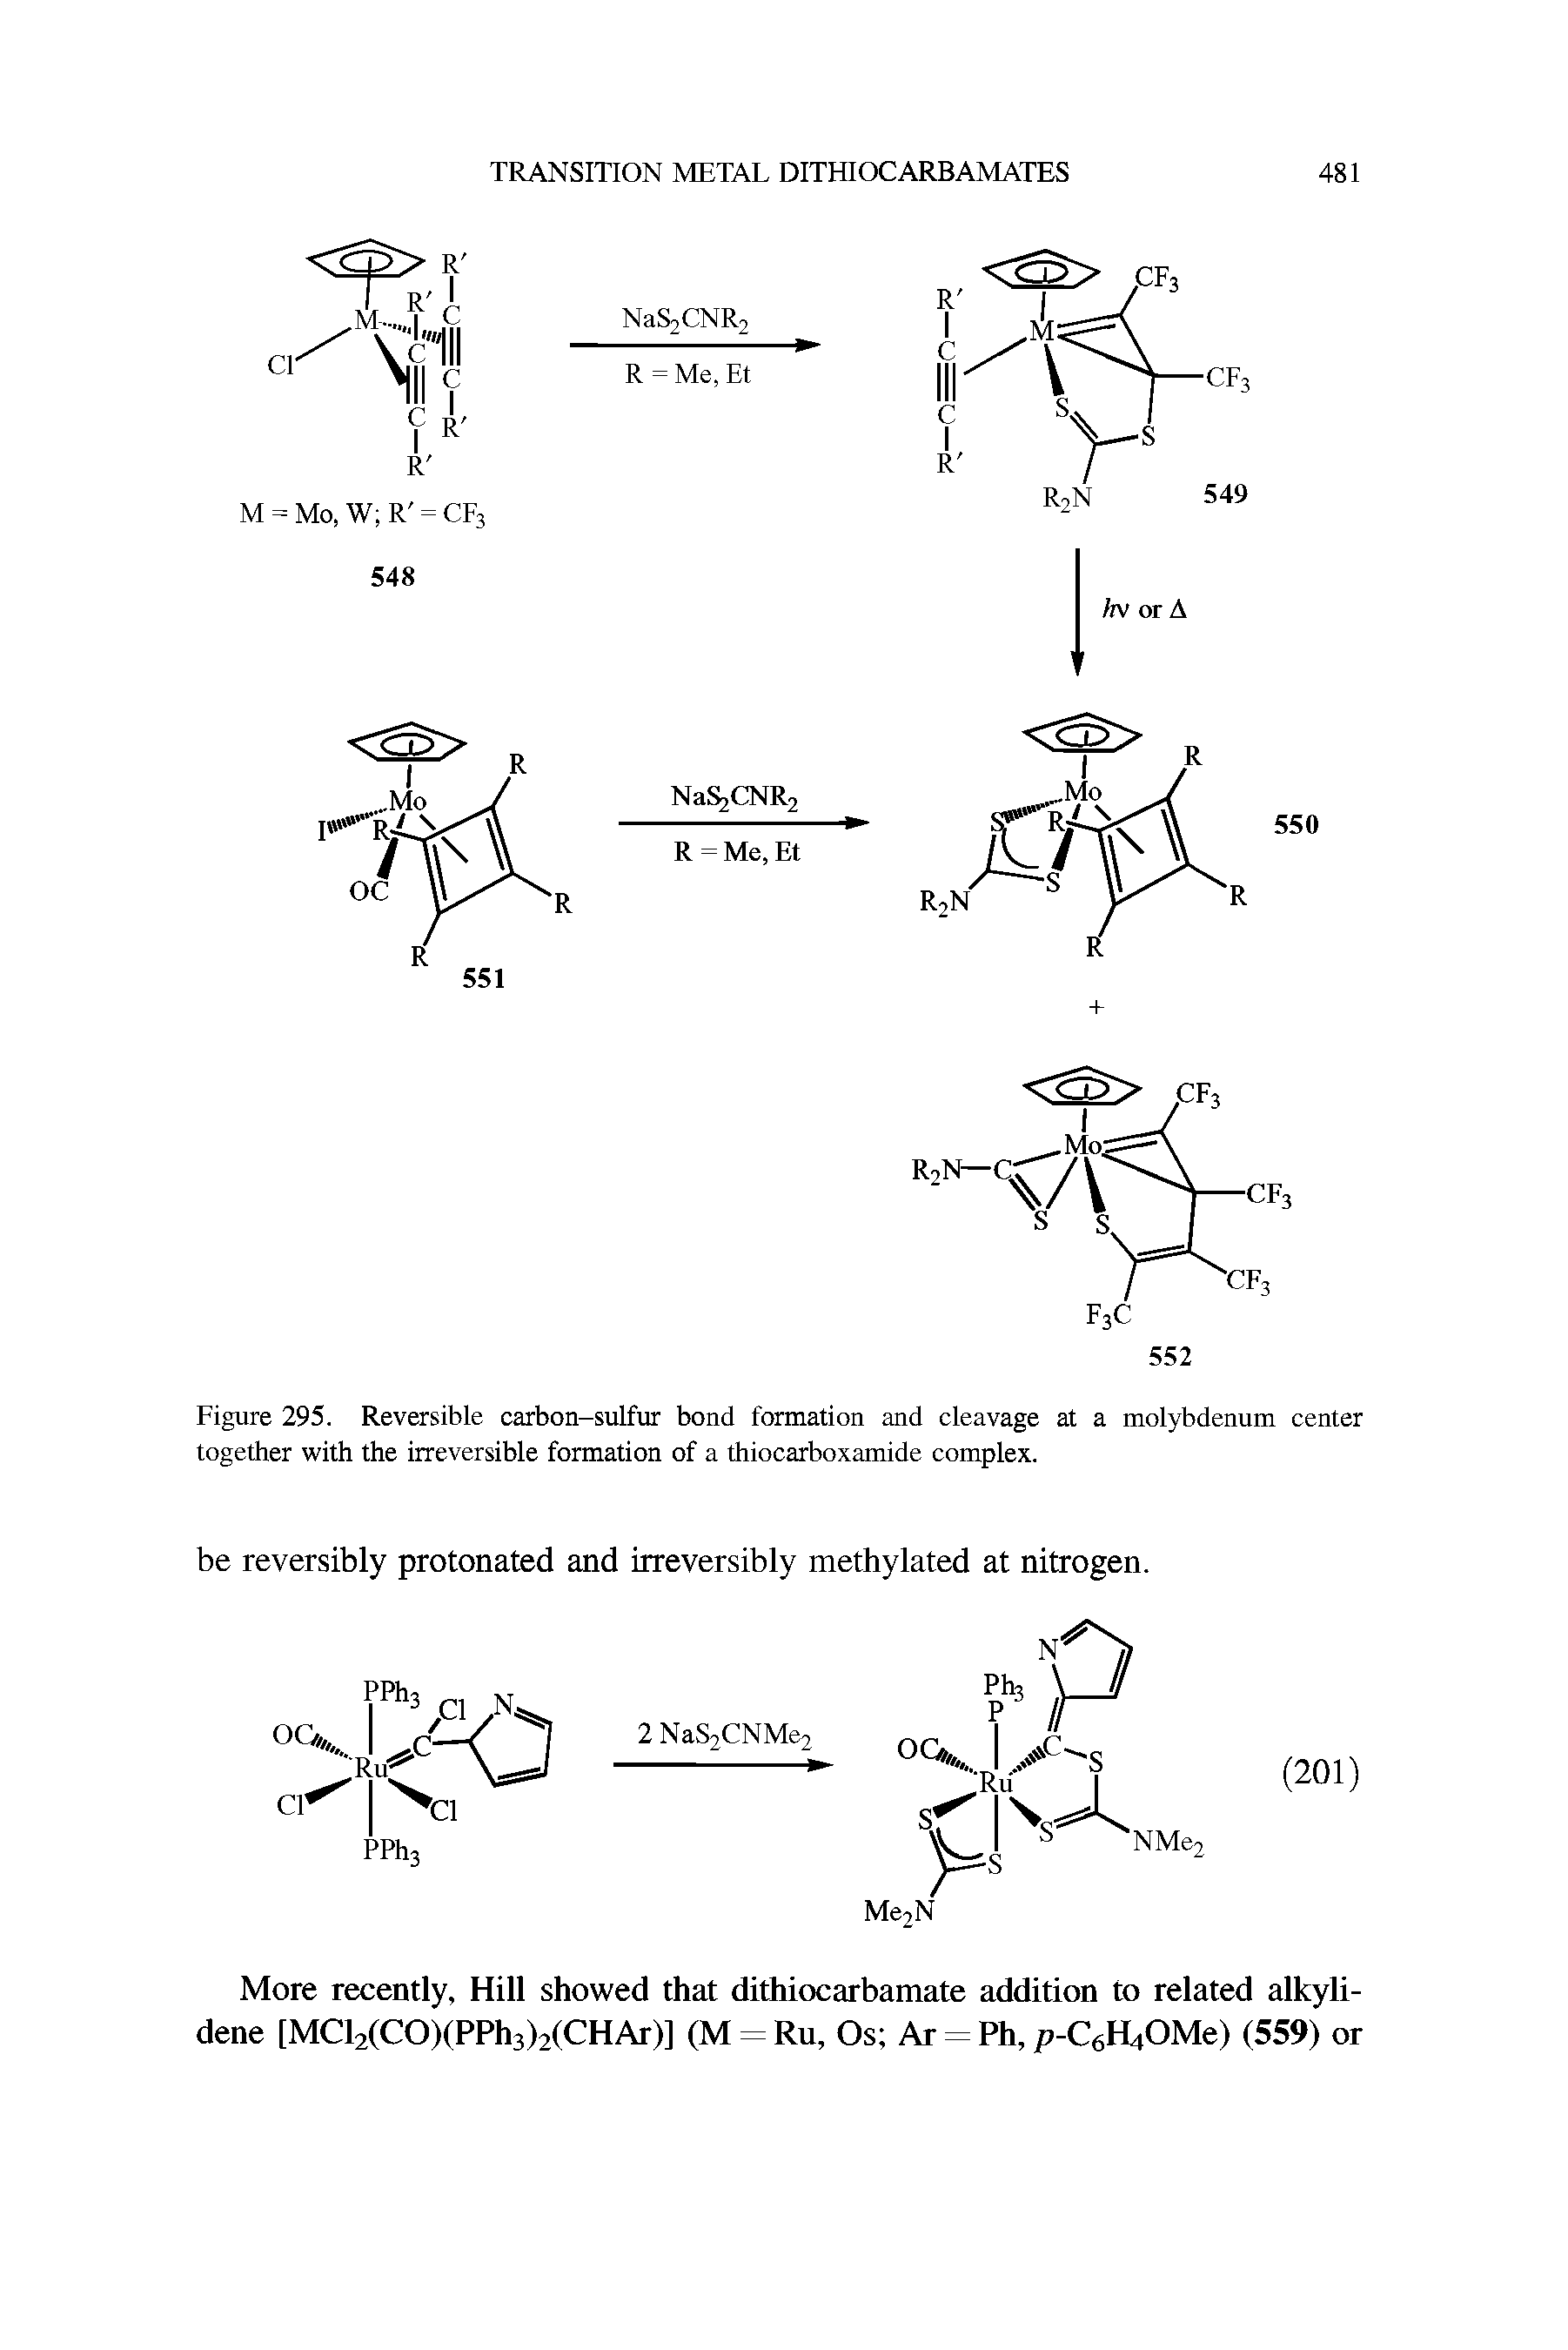 Figure 295. Reversible carbon-sulfur bond formation and cleavage at a molybdenum center together with the irreversible formation of a thiocarboxamide complex.